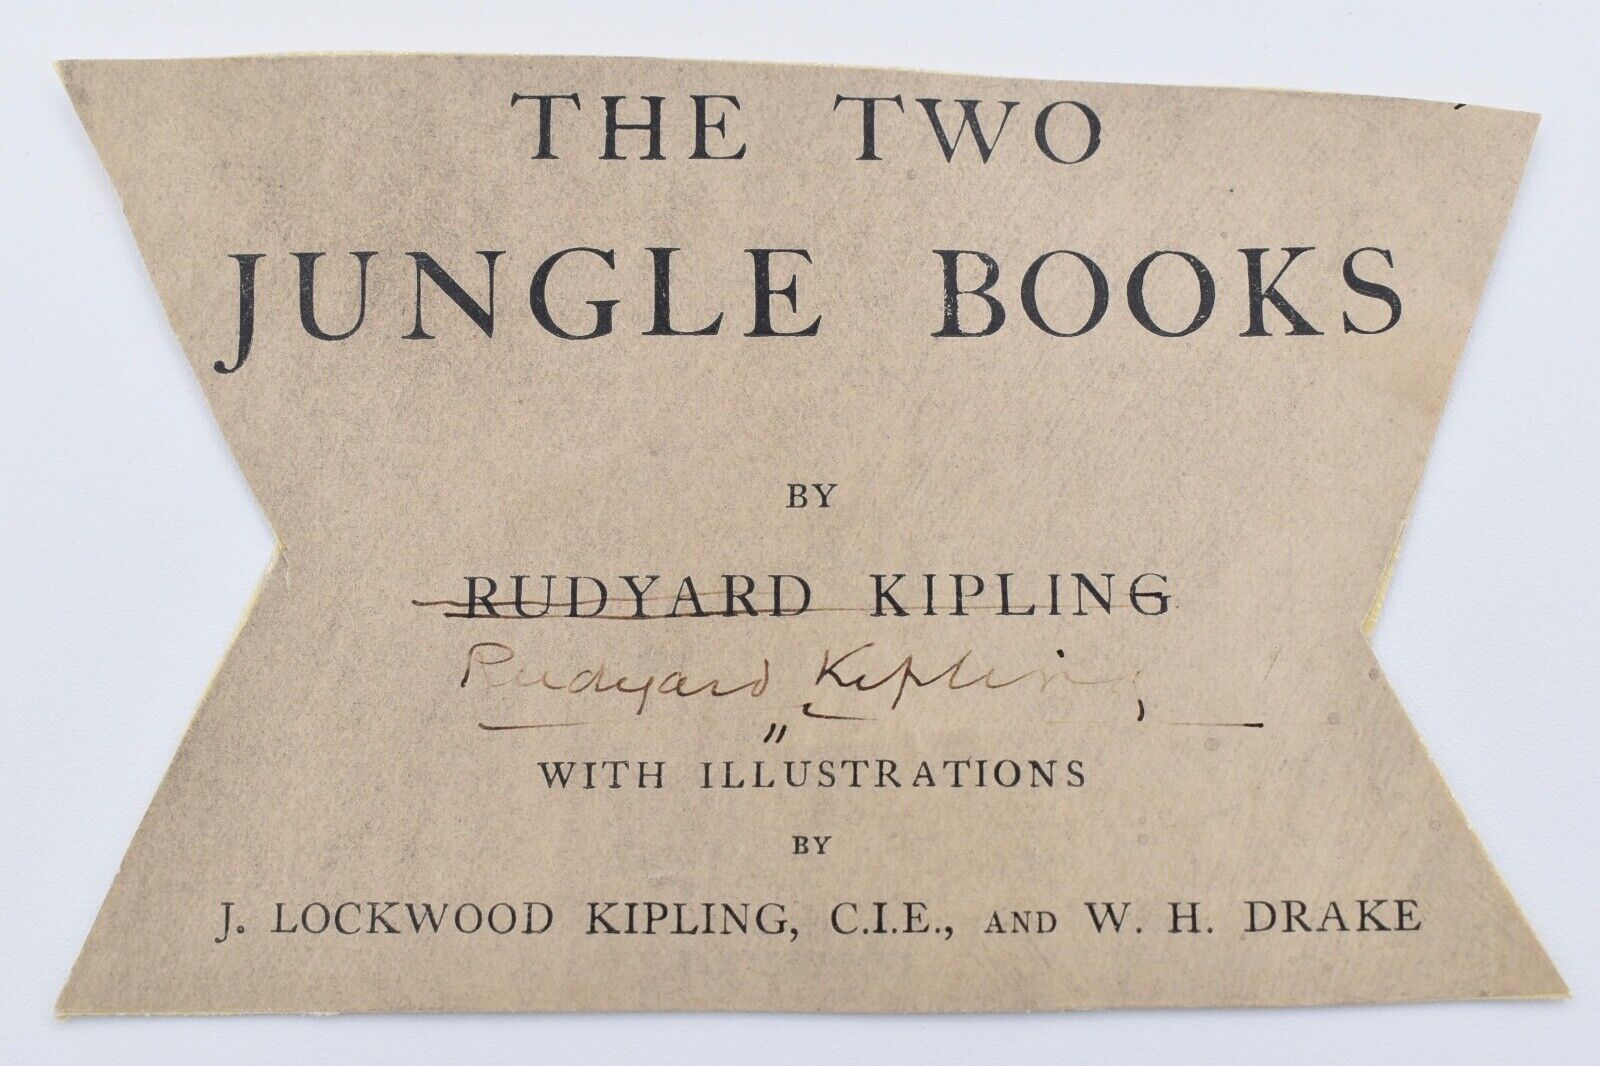 Rudyard Kipling, Autograph Signature Clipping, English Author of the Jungle Book